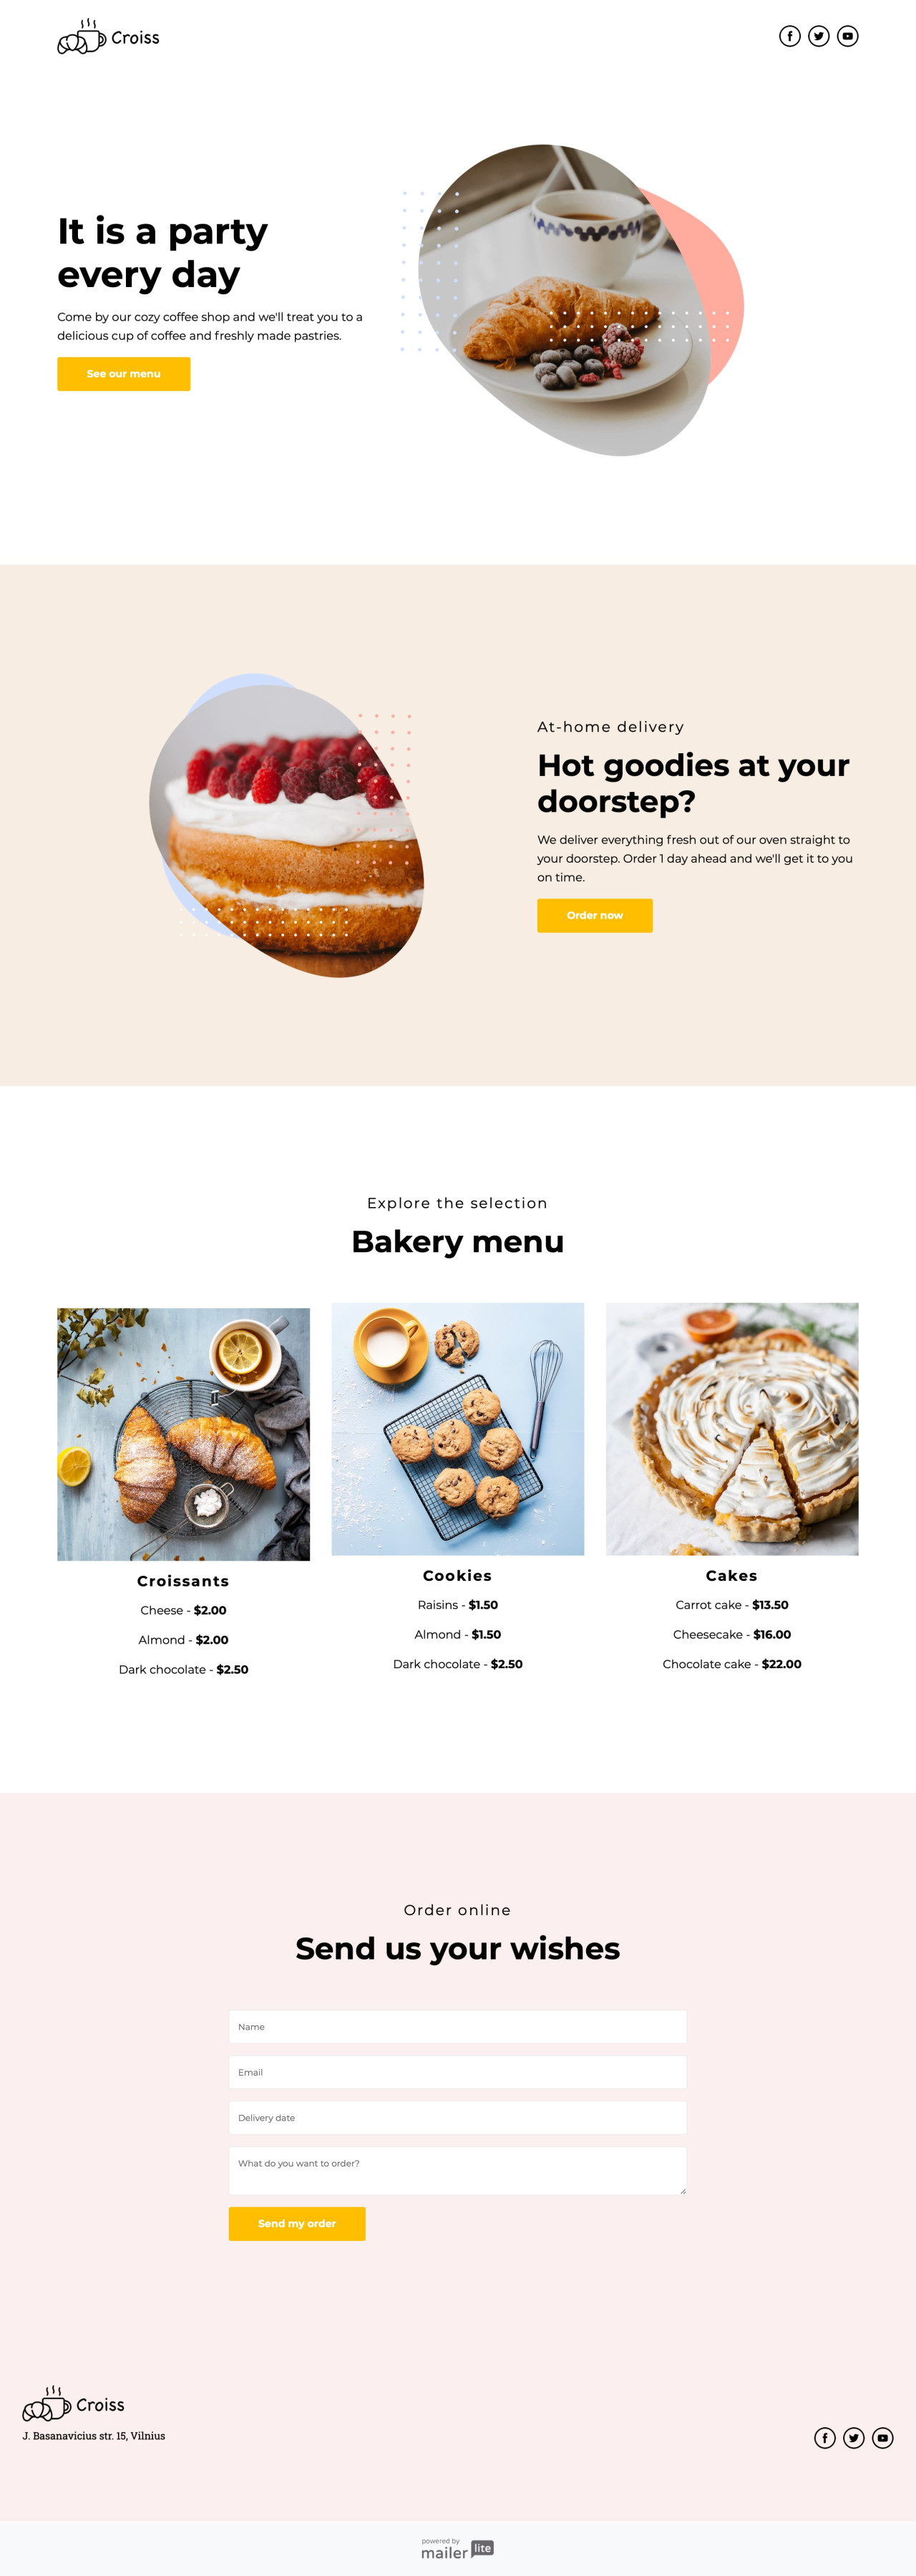 Bakery example - Made with MailerLite